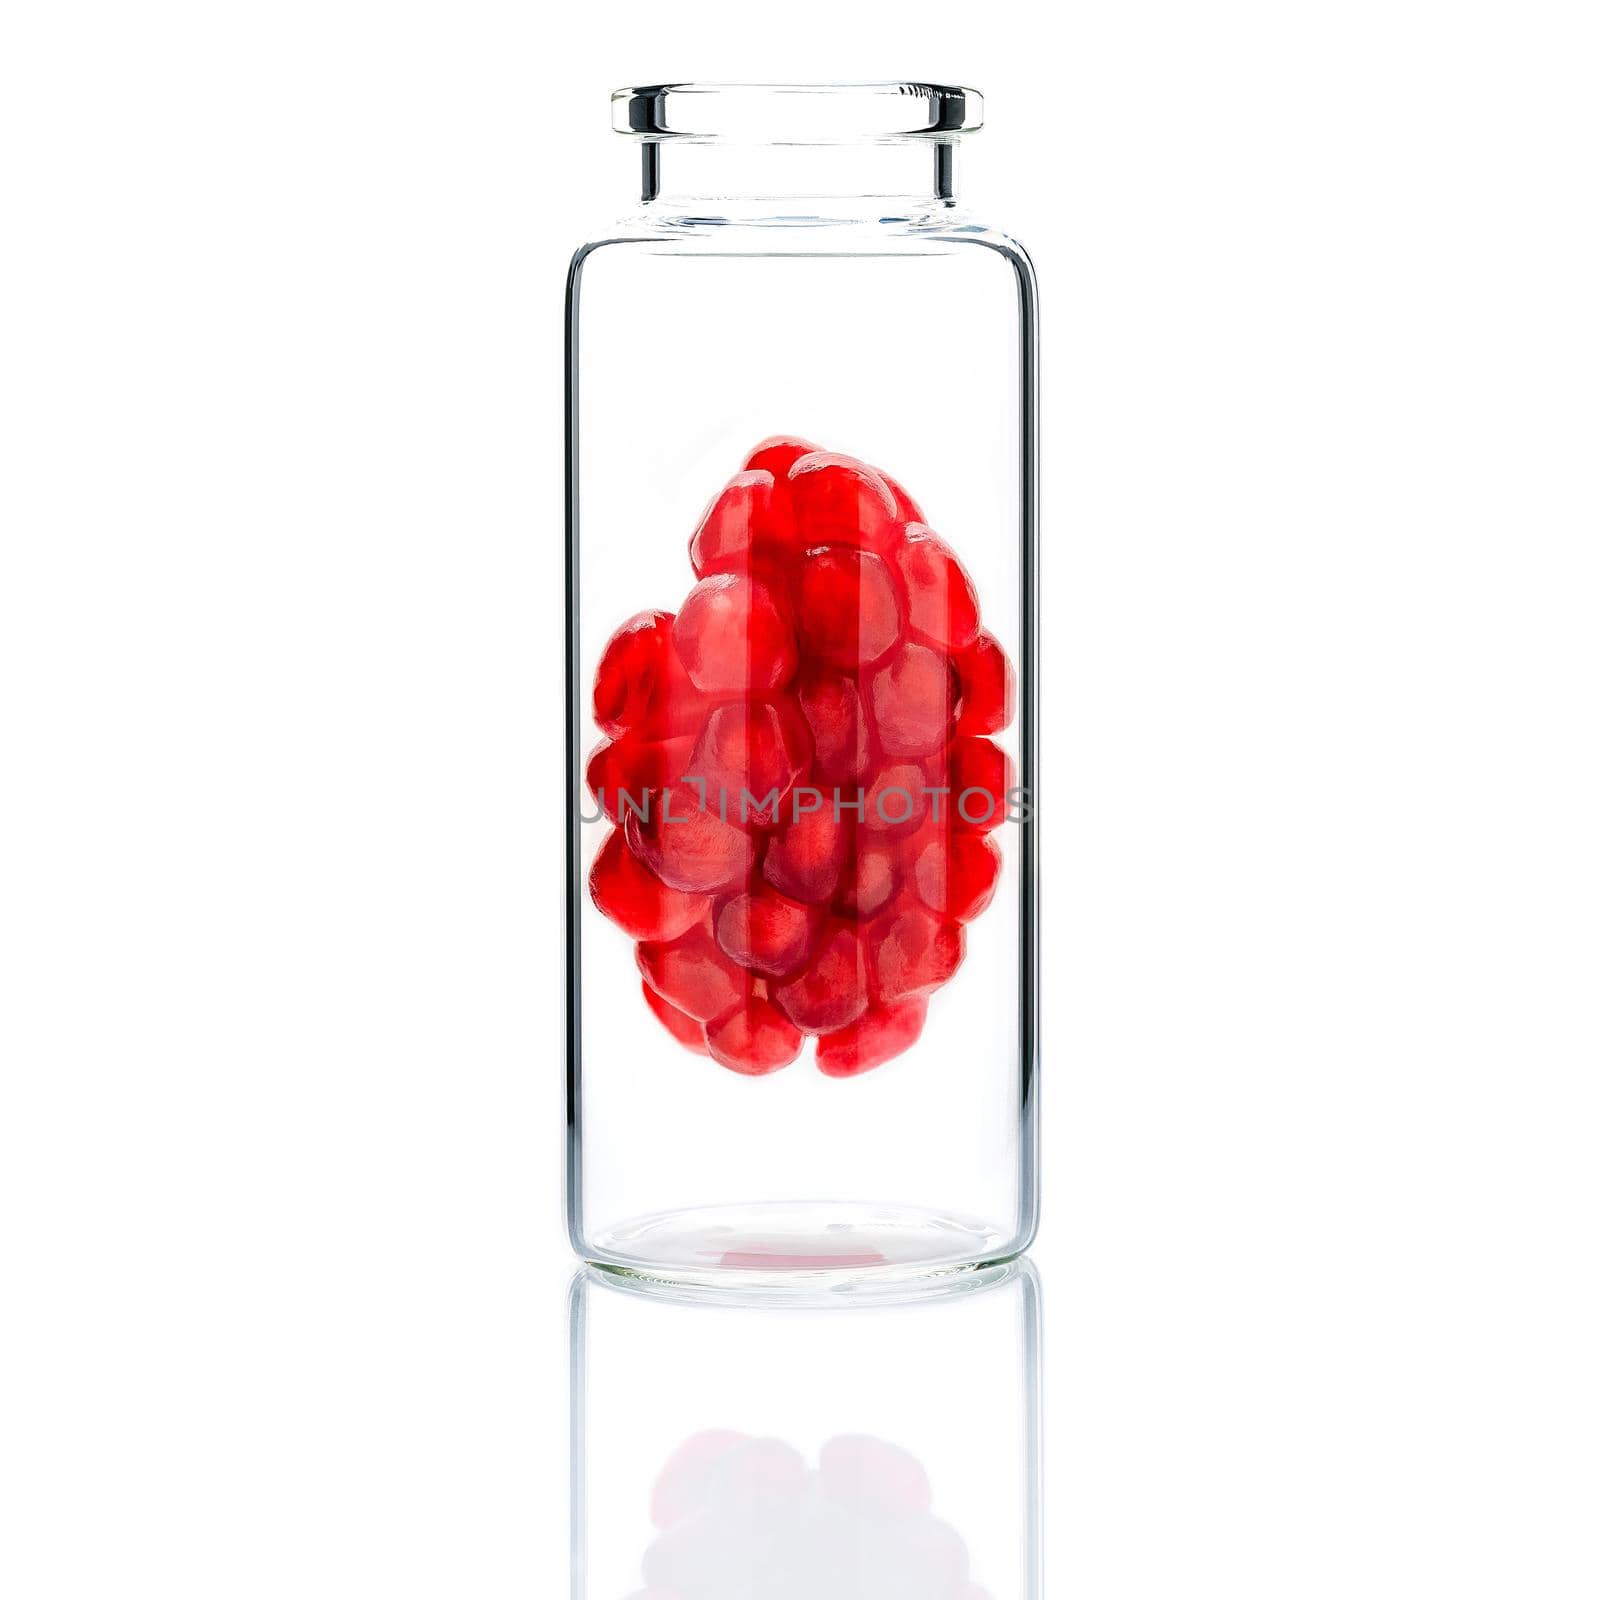  Homemade skin care with pomegranate seeds in a glass bottle  isolate on white background. by kerdkanno